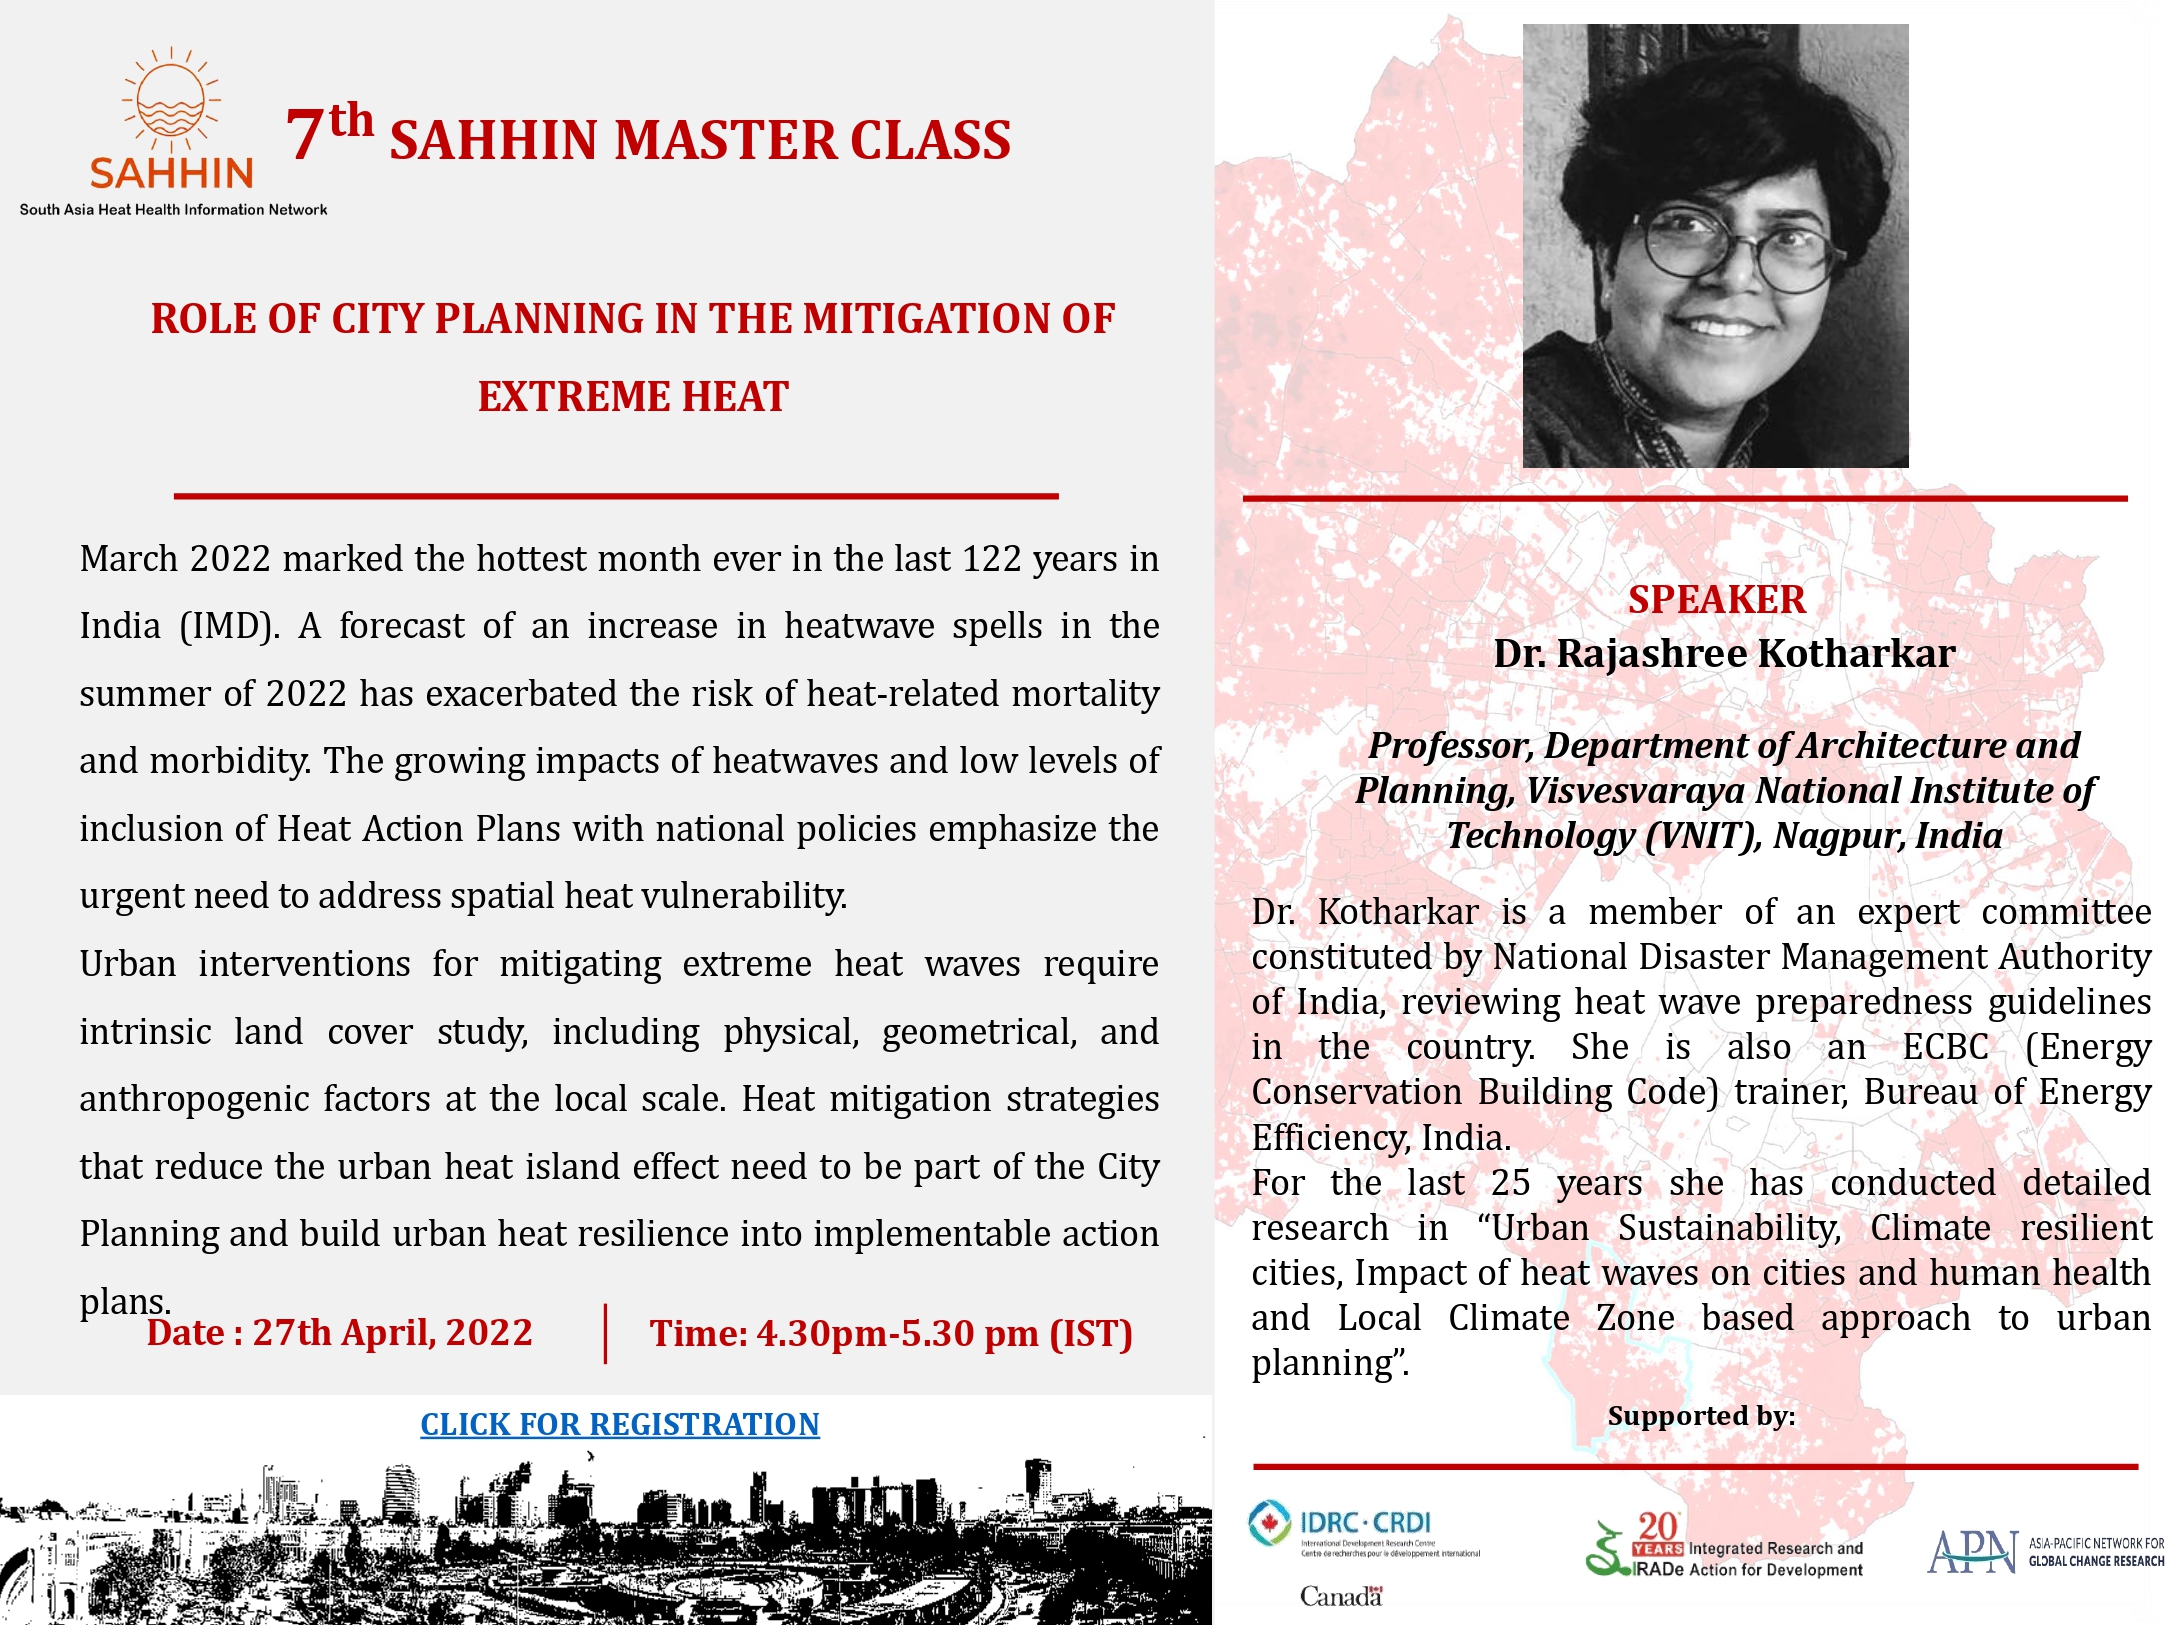 Seventh SAHHIN Global Master Class on “Role of City Planning in The Mitigation of Extreme Heat”